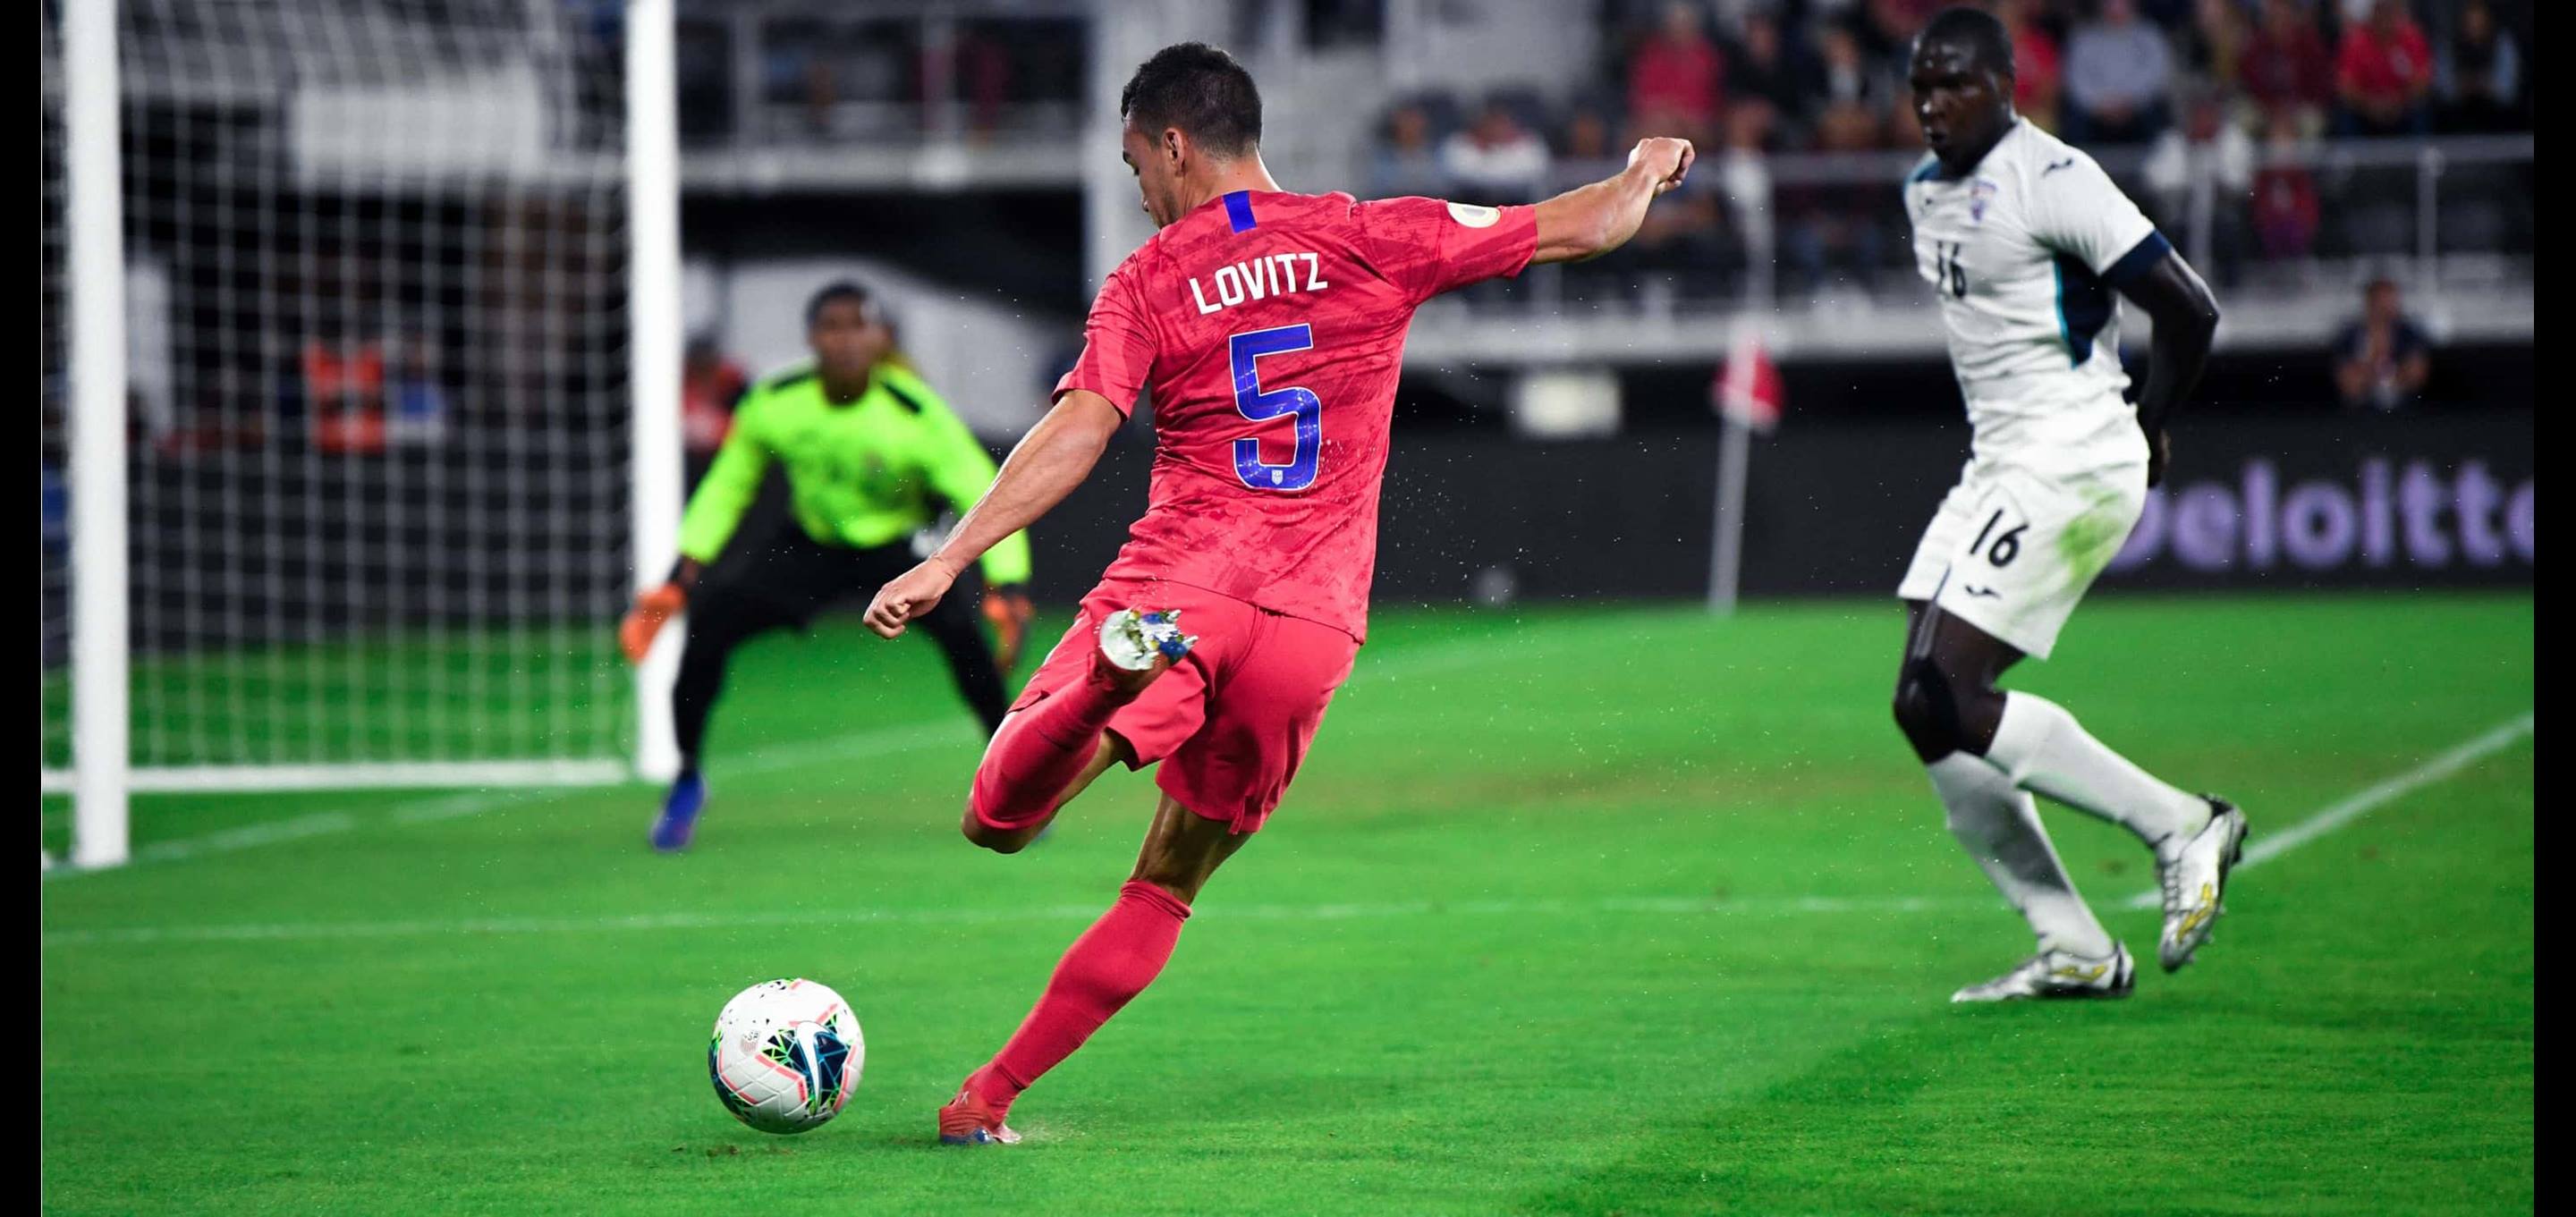 USA vs. Cuba, CONCACAF Nations League group stage: What to watch for -  Stars and Stripes FC